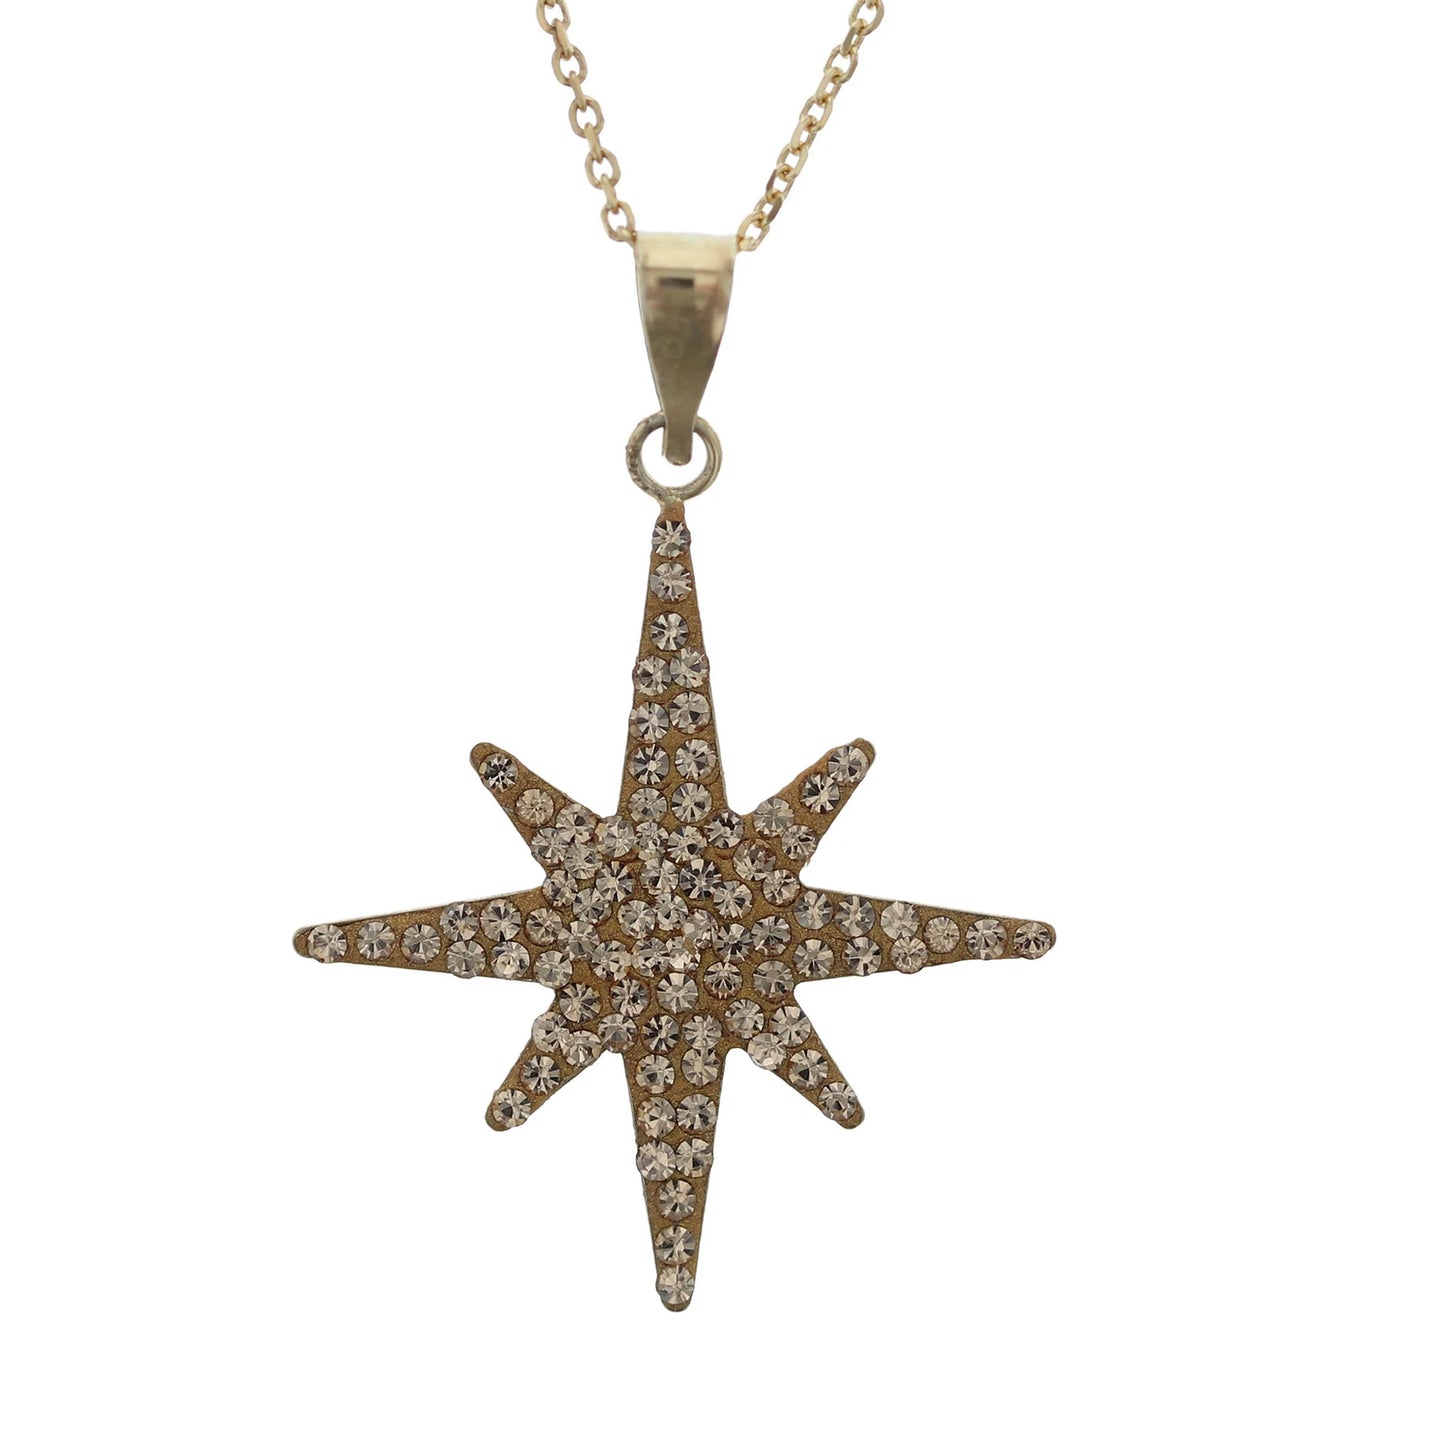 18K Gold Plated Sterling Silver North Star Pendant with Light Colorado Topaz Crystals